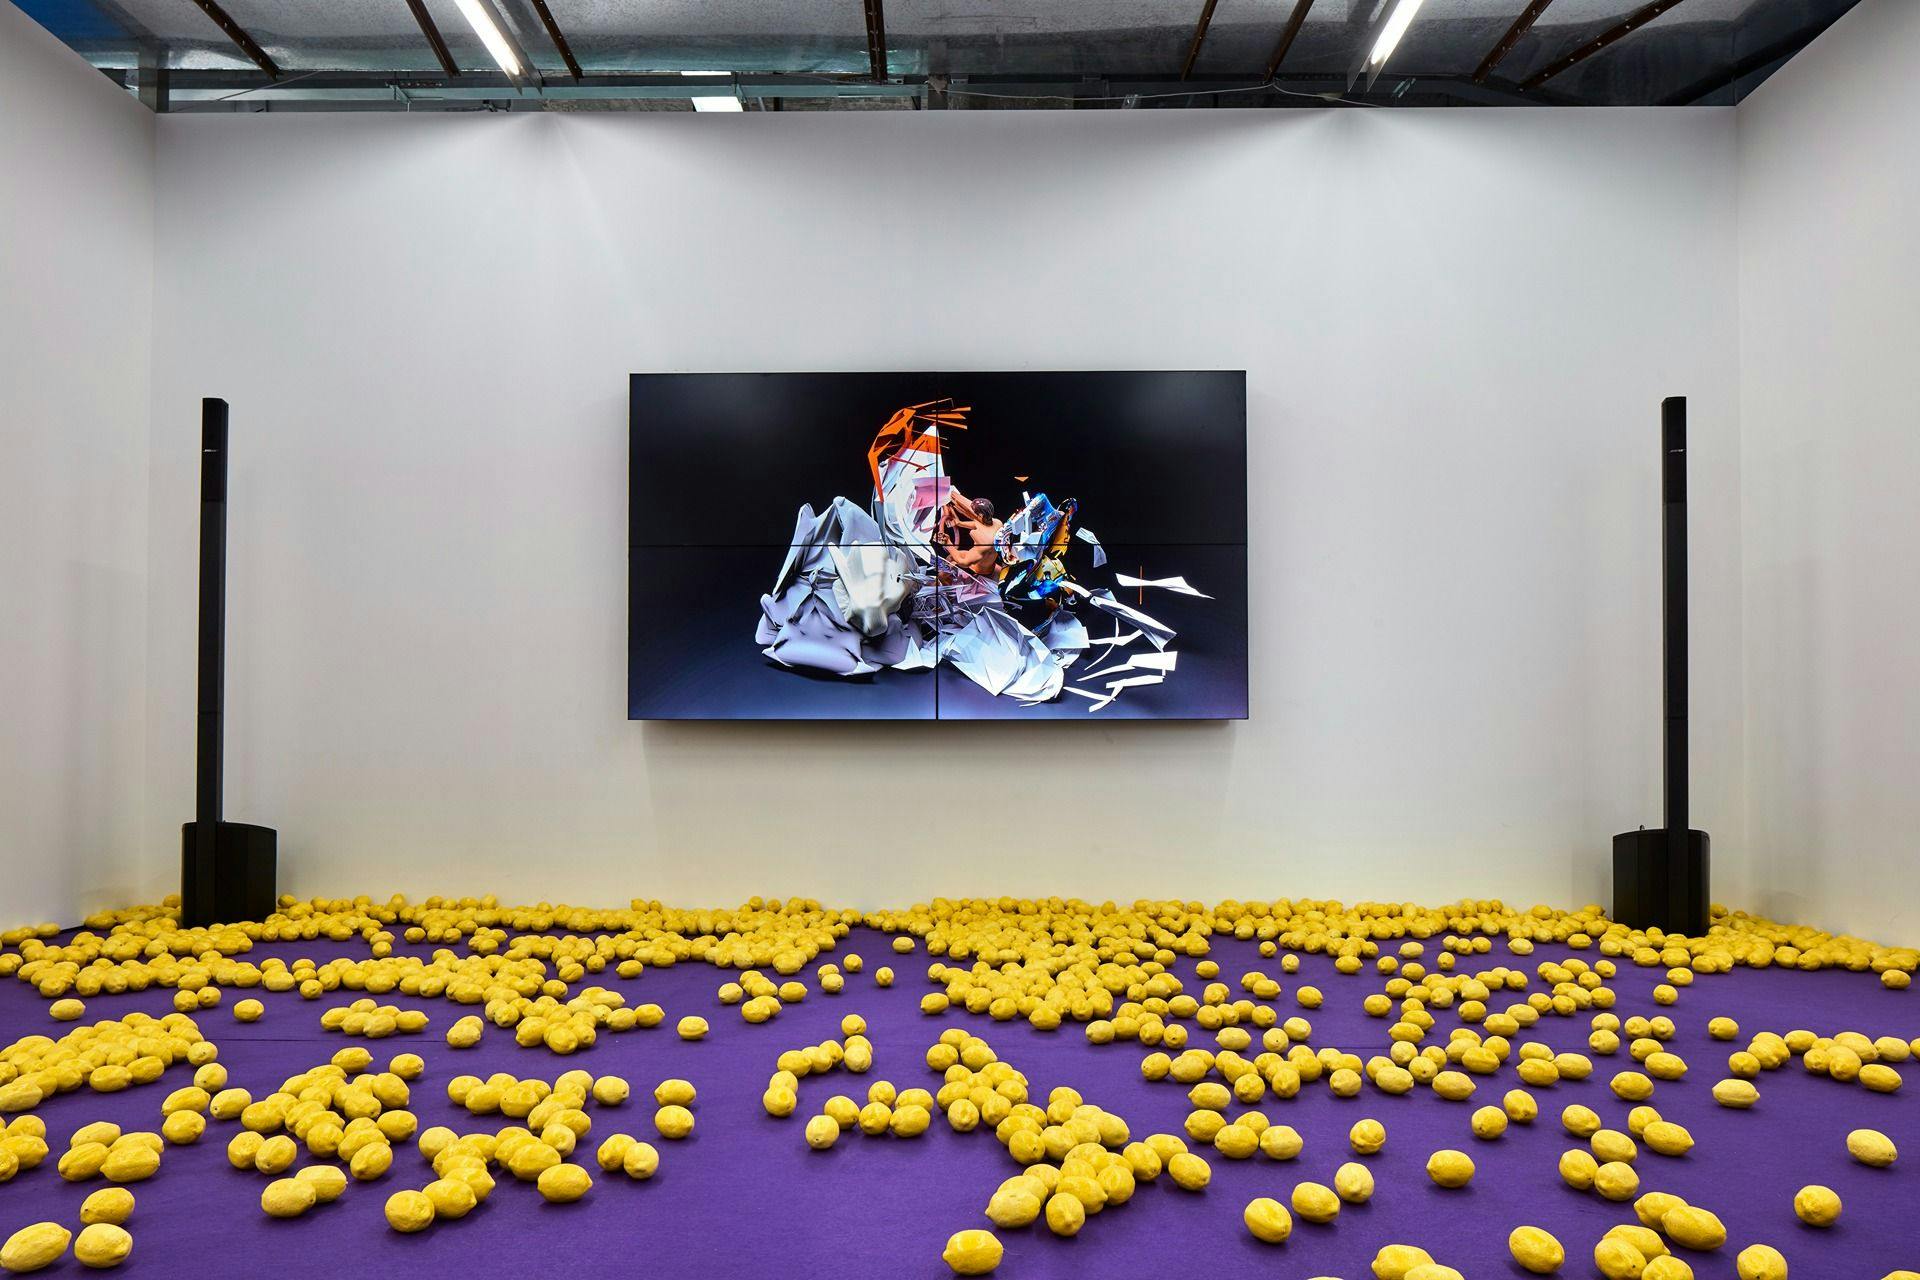 Installation view of Installation view, Samson Young, The highway is like a lion's mouth, 6 November - 23 December 2018, Edouard Malingue Gallery, Shanghai. A tv screen with a still of the video is hanging on a white wall. There are 2 freestanding speakers either side. The floor is carpeted in purple carpet and there are yellow objects scattered across the floor. It is difficult to discern what these objects are.